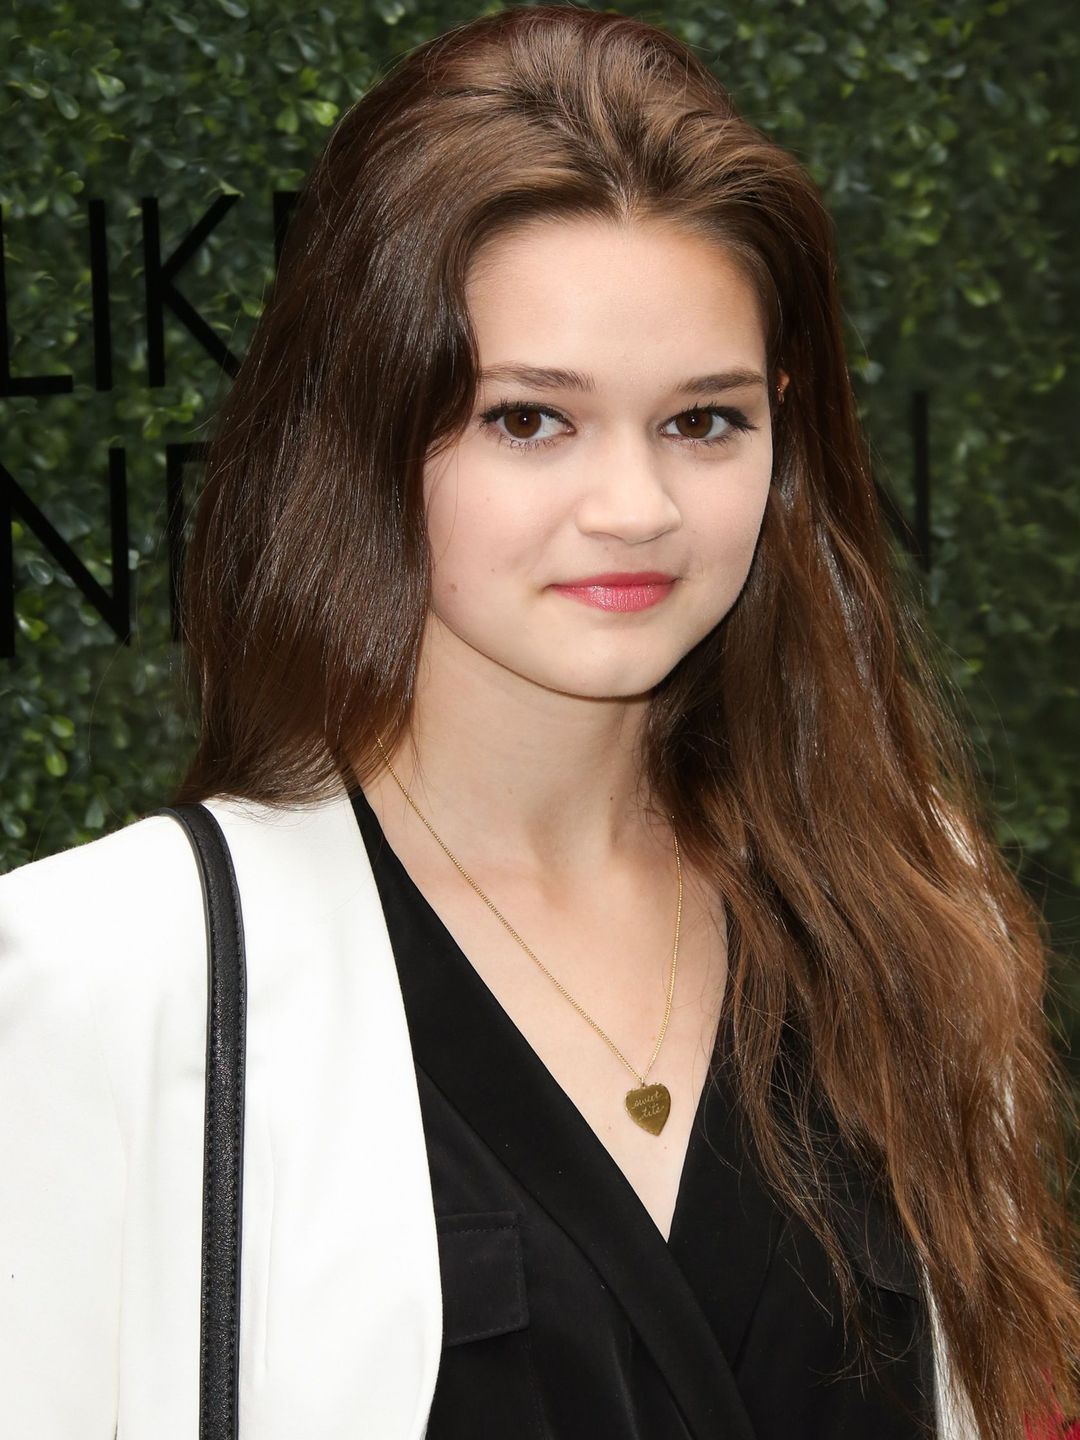 Ciara Bravo who is her father